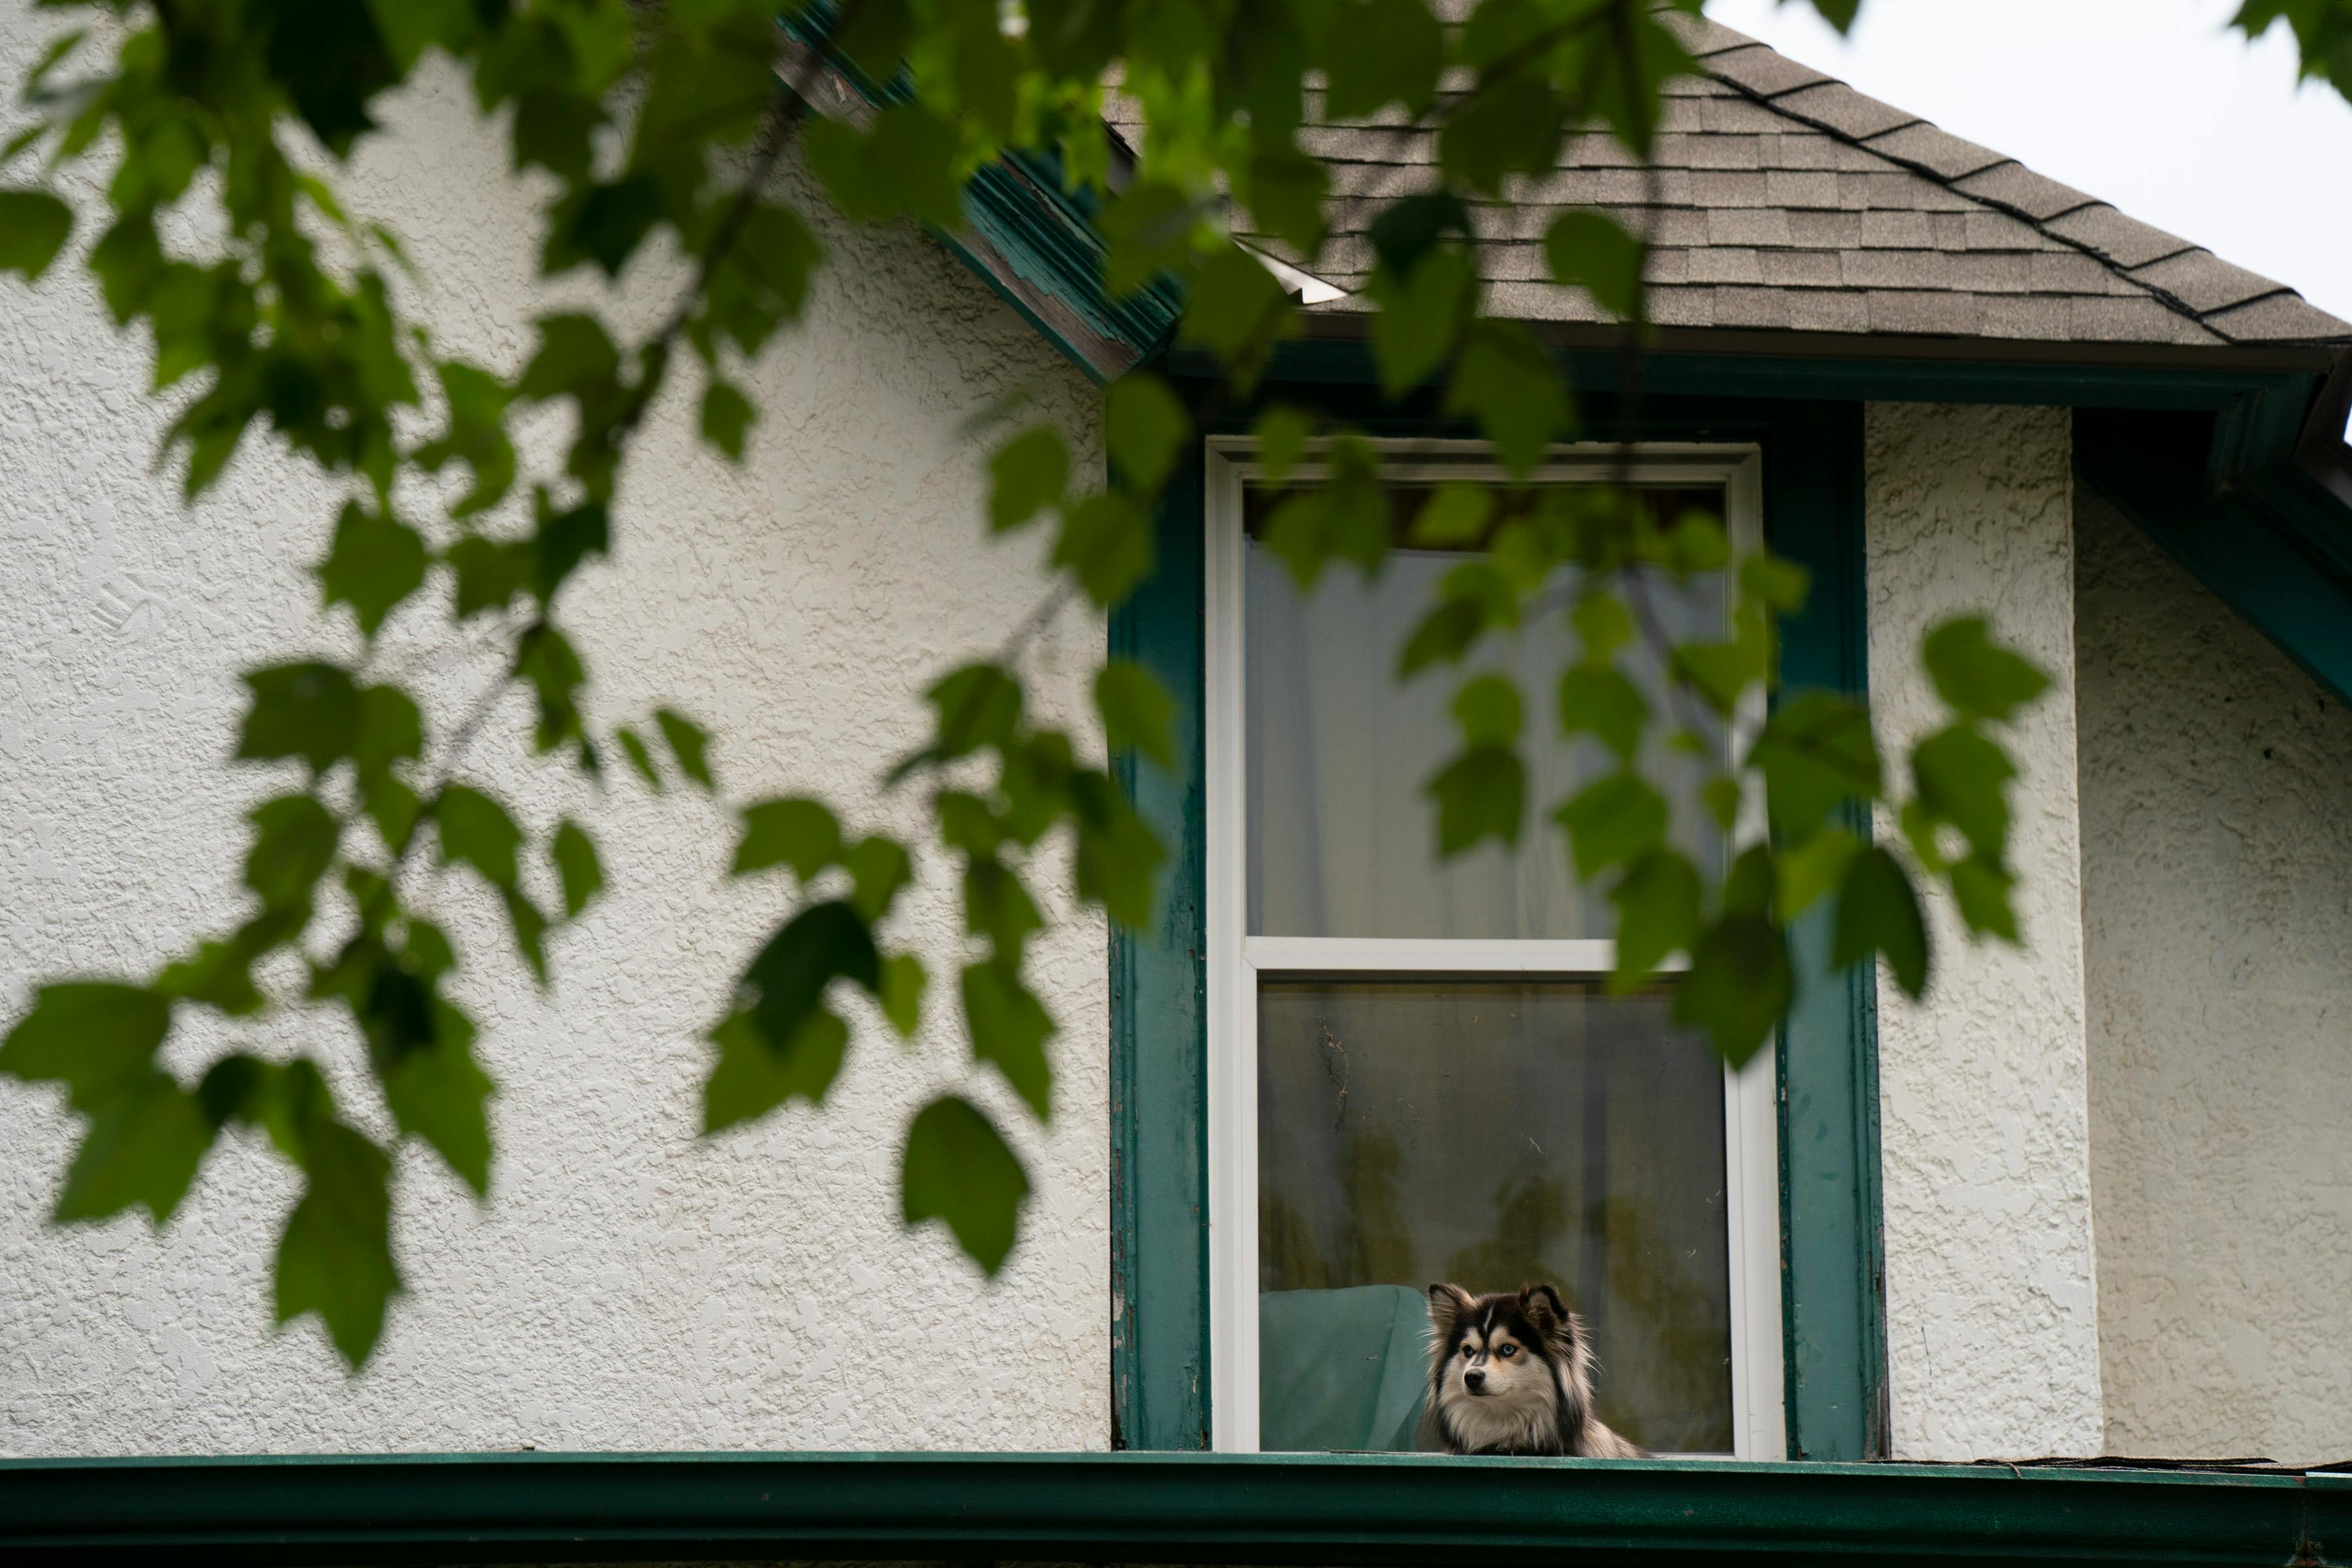 A dog looks out the window of a stucco home in Minneapolis during The Wedge Cat Tour in August 2021.